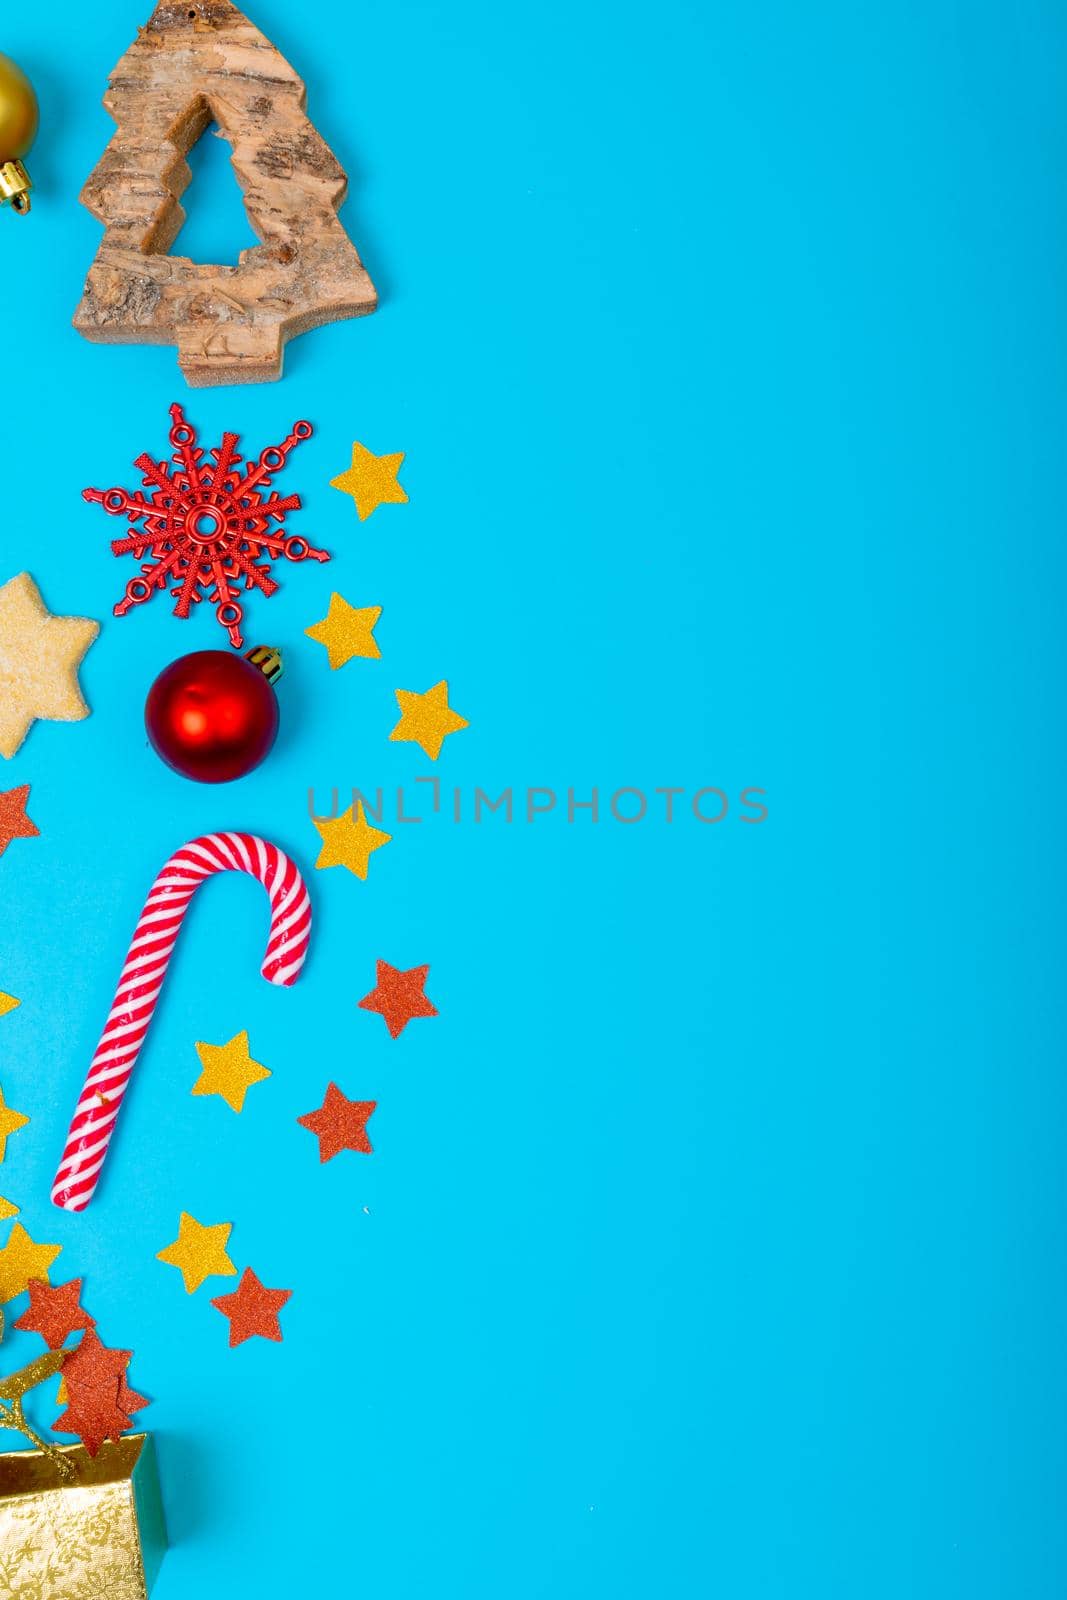 Composition of christmas decorations with candy canes and copy space on blue background. christmas, tradition and celebration concept.